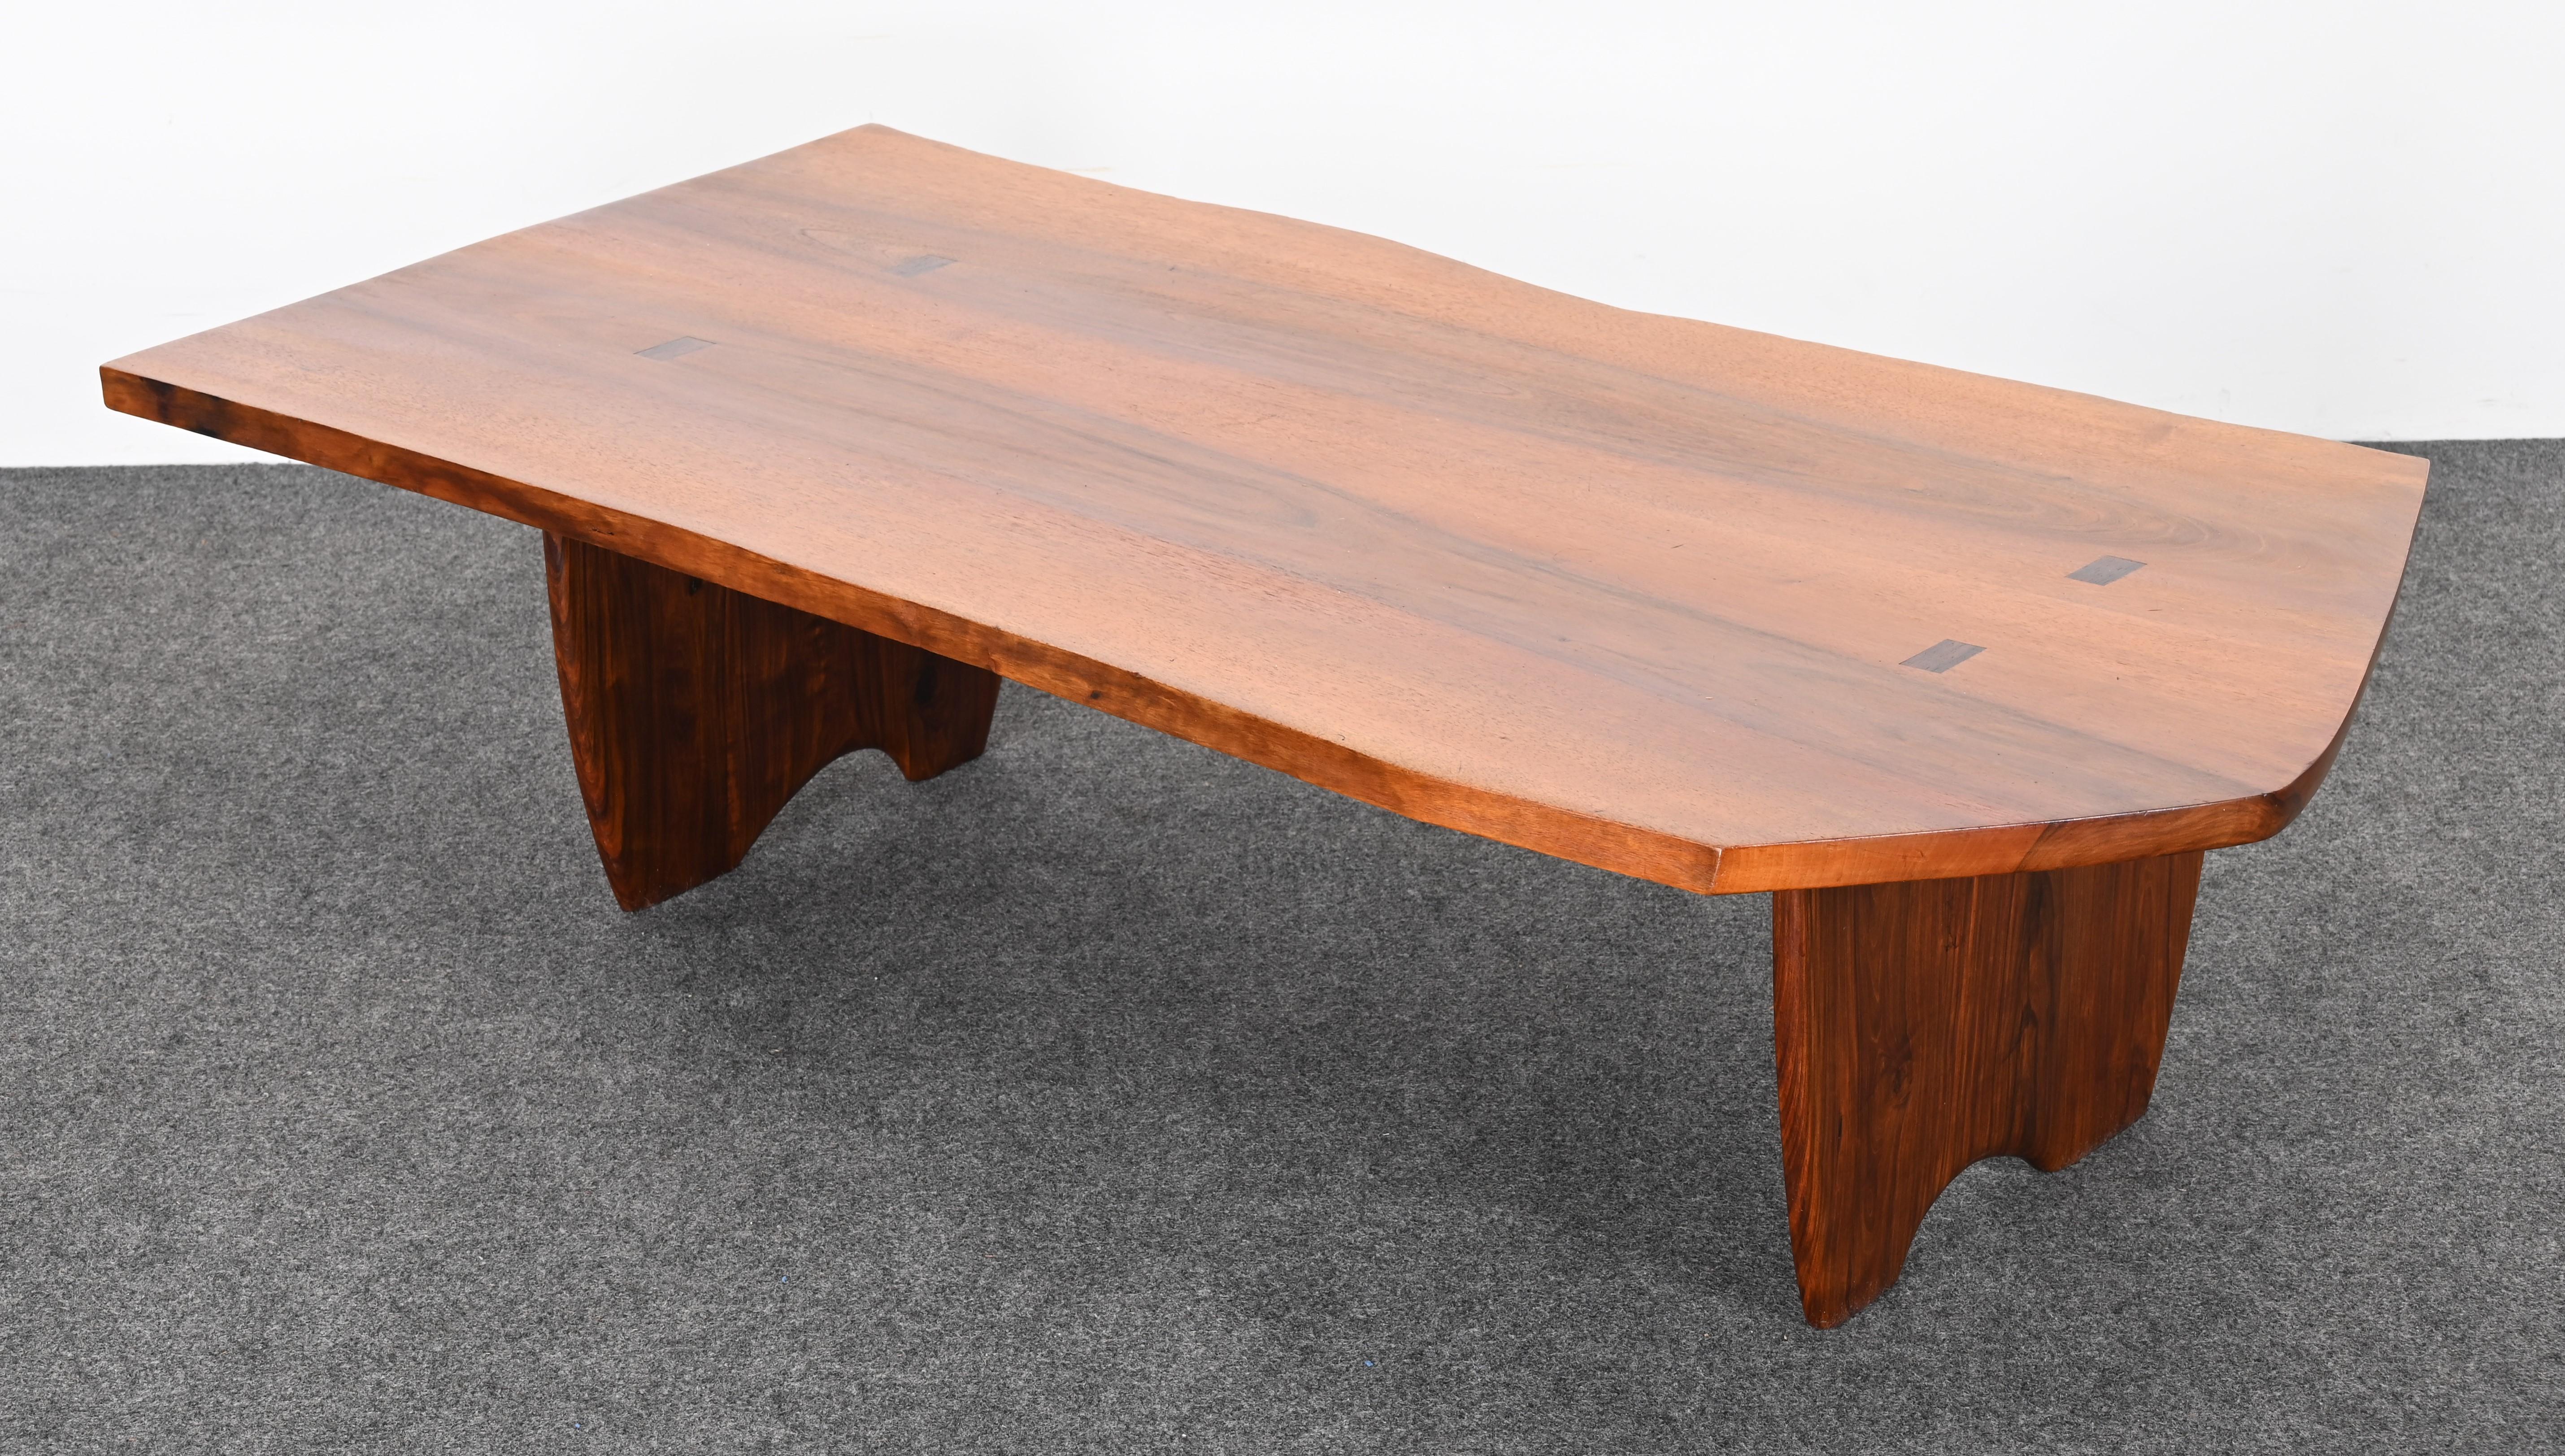 Mid-20th Century Live Edge Solid Walnut and Rosewood Coffee Table by Richard Rothbard, 1968 For Sale